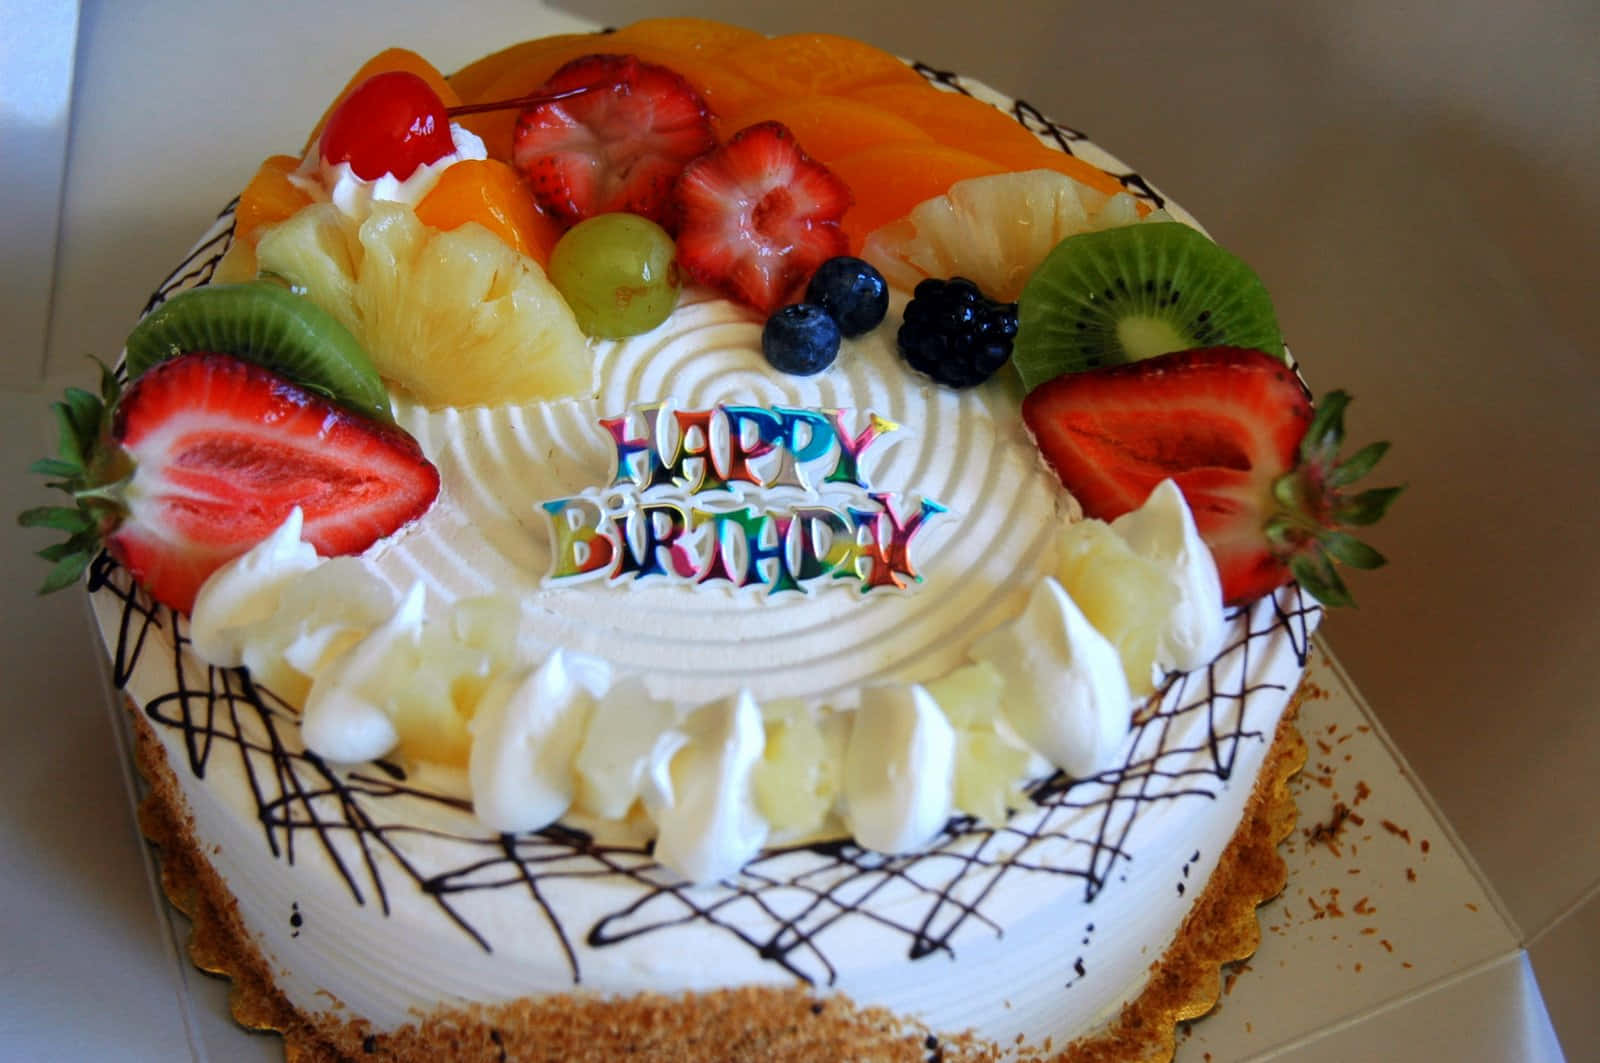 Delightful Birthday Cake with Colorful Candles